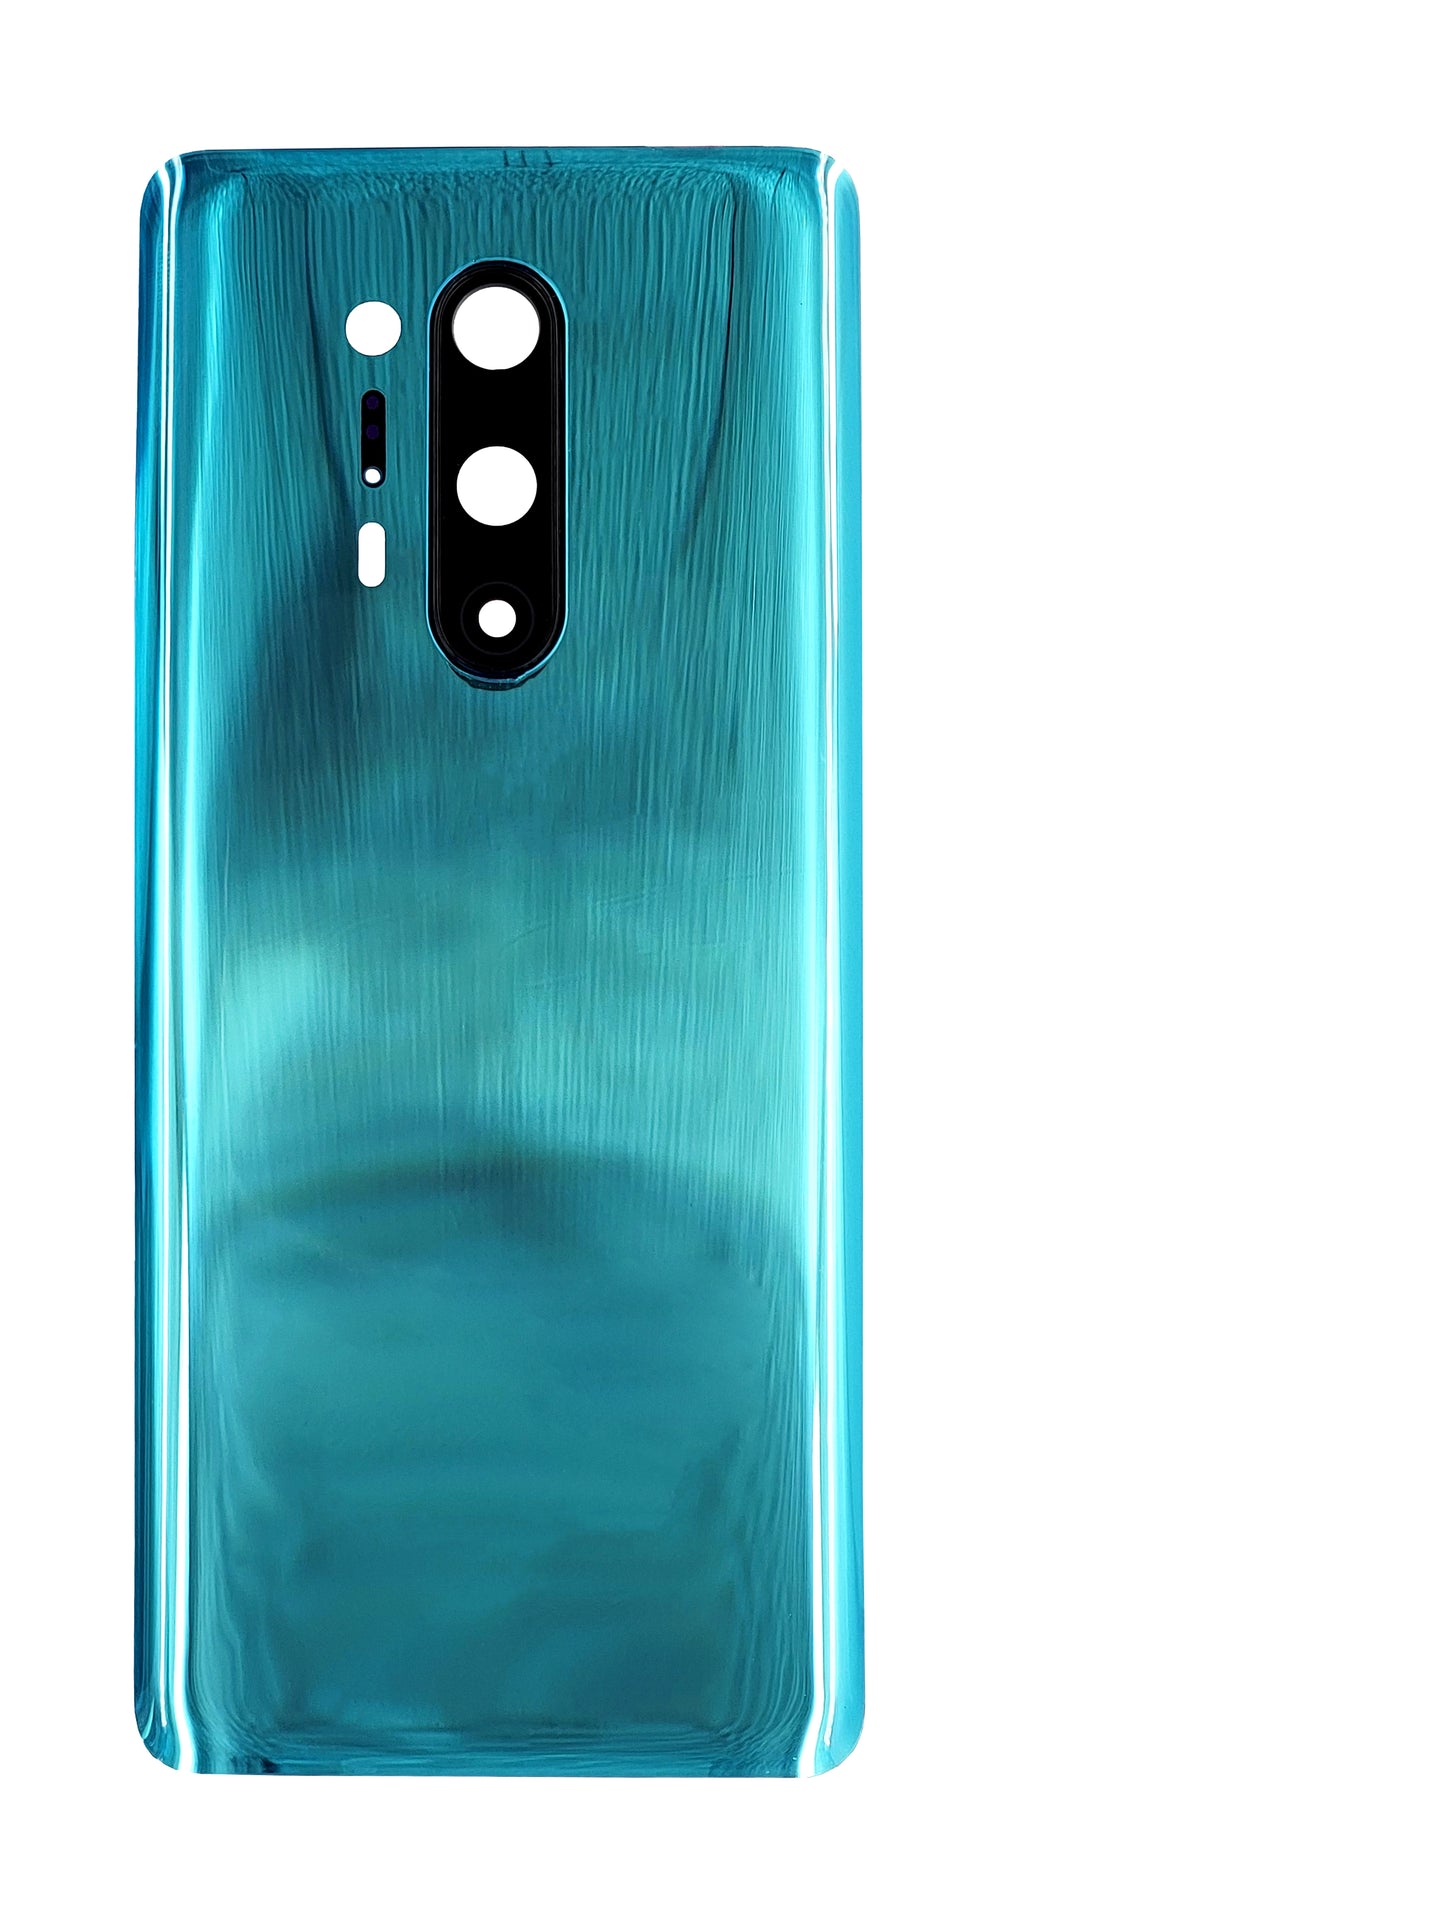 OPS 1+8 Pro Back Cover (Glacial Green)